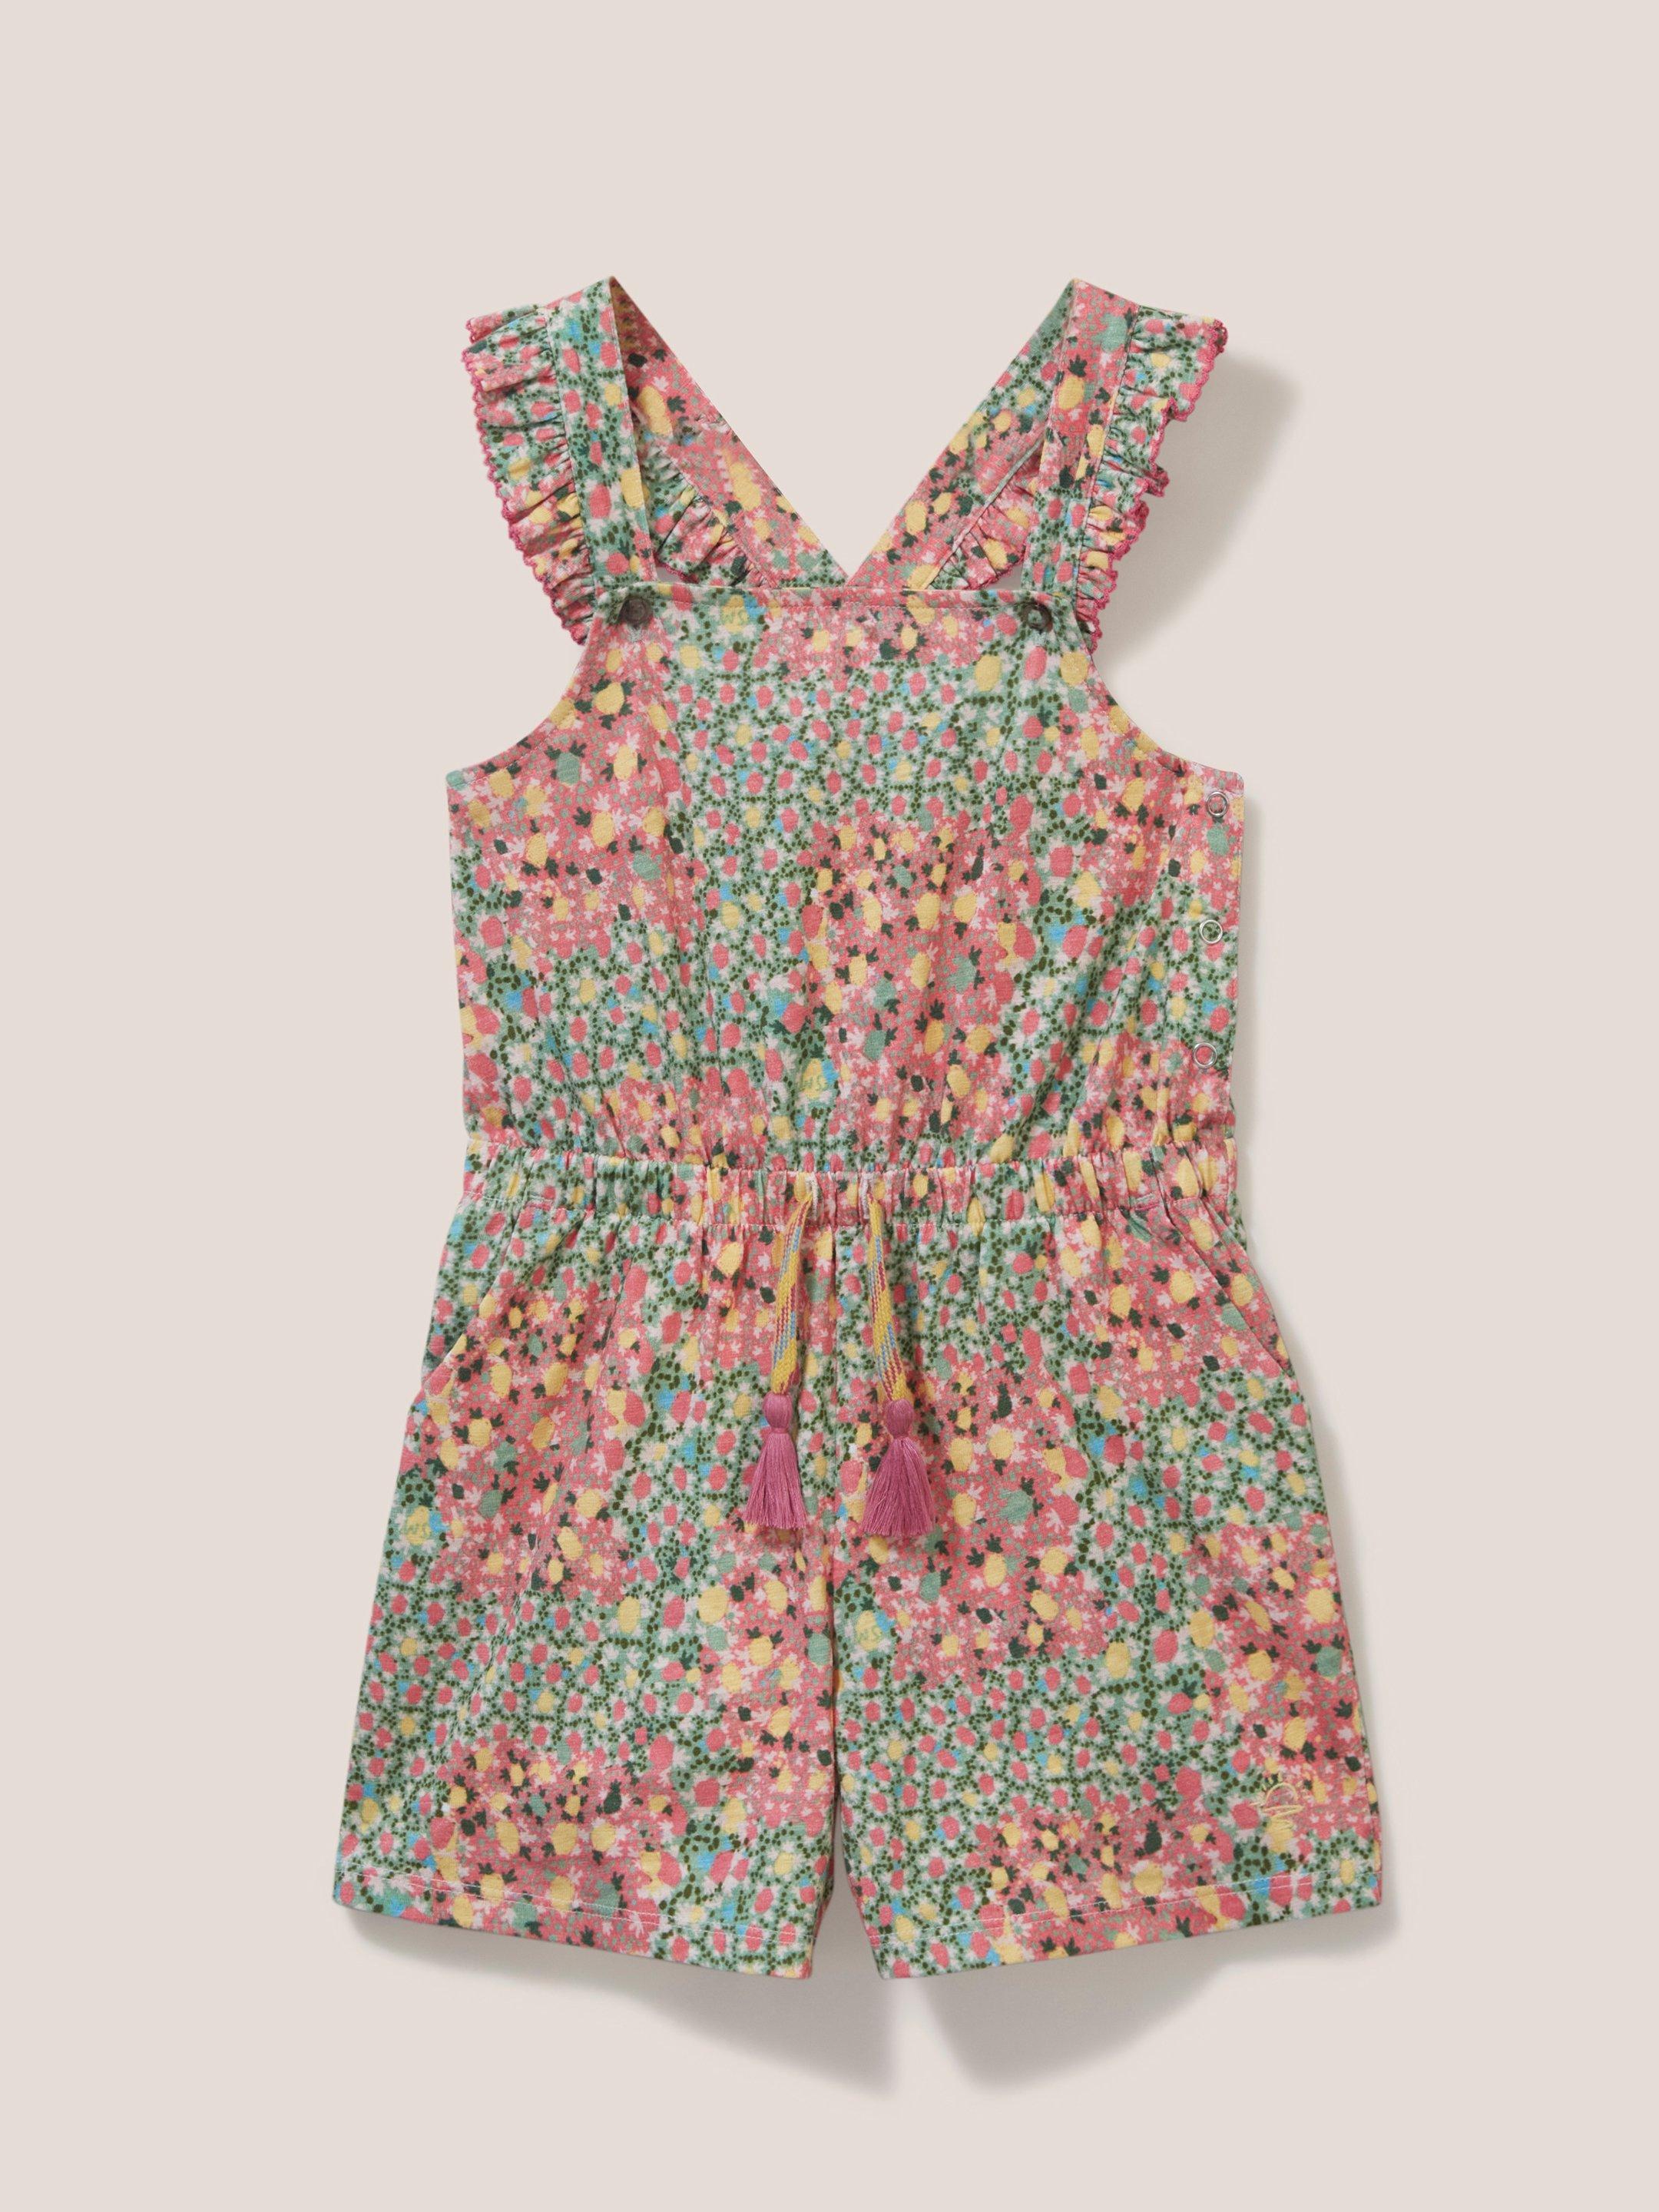 Ava Printed Playsuit in PINK MLT - FLAT FRONT